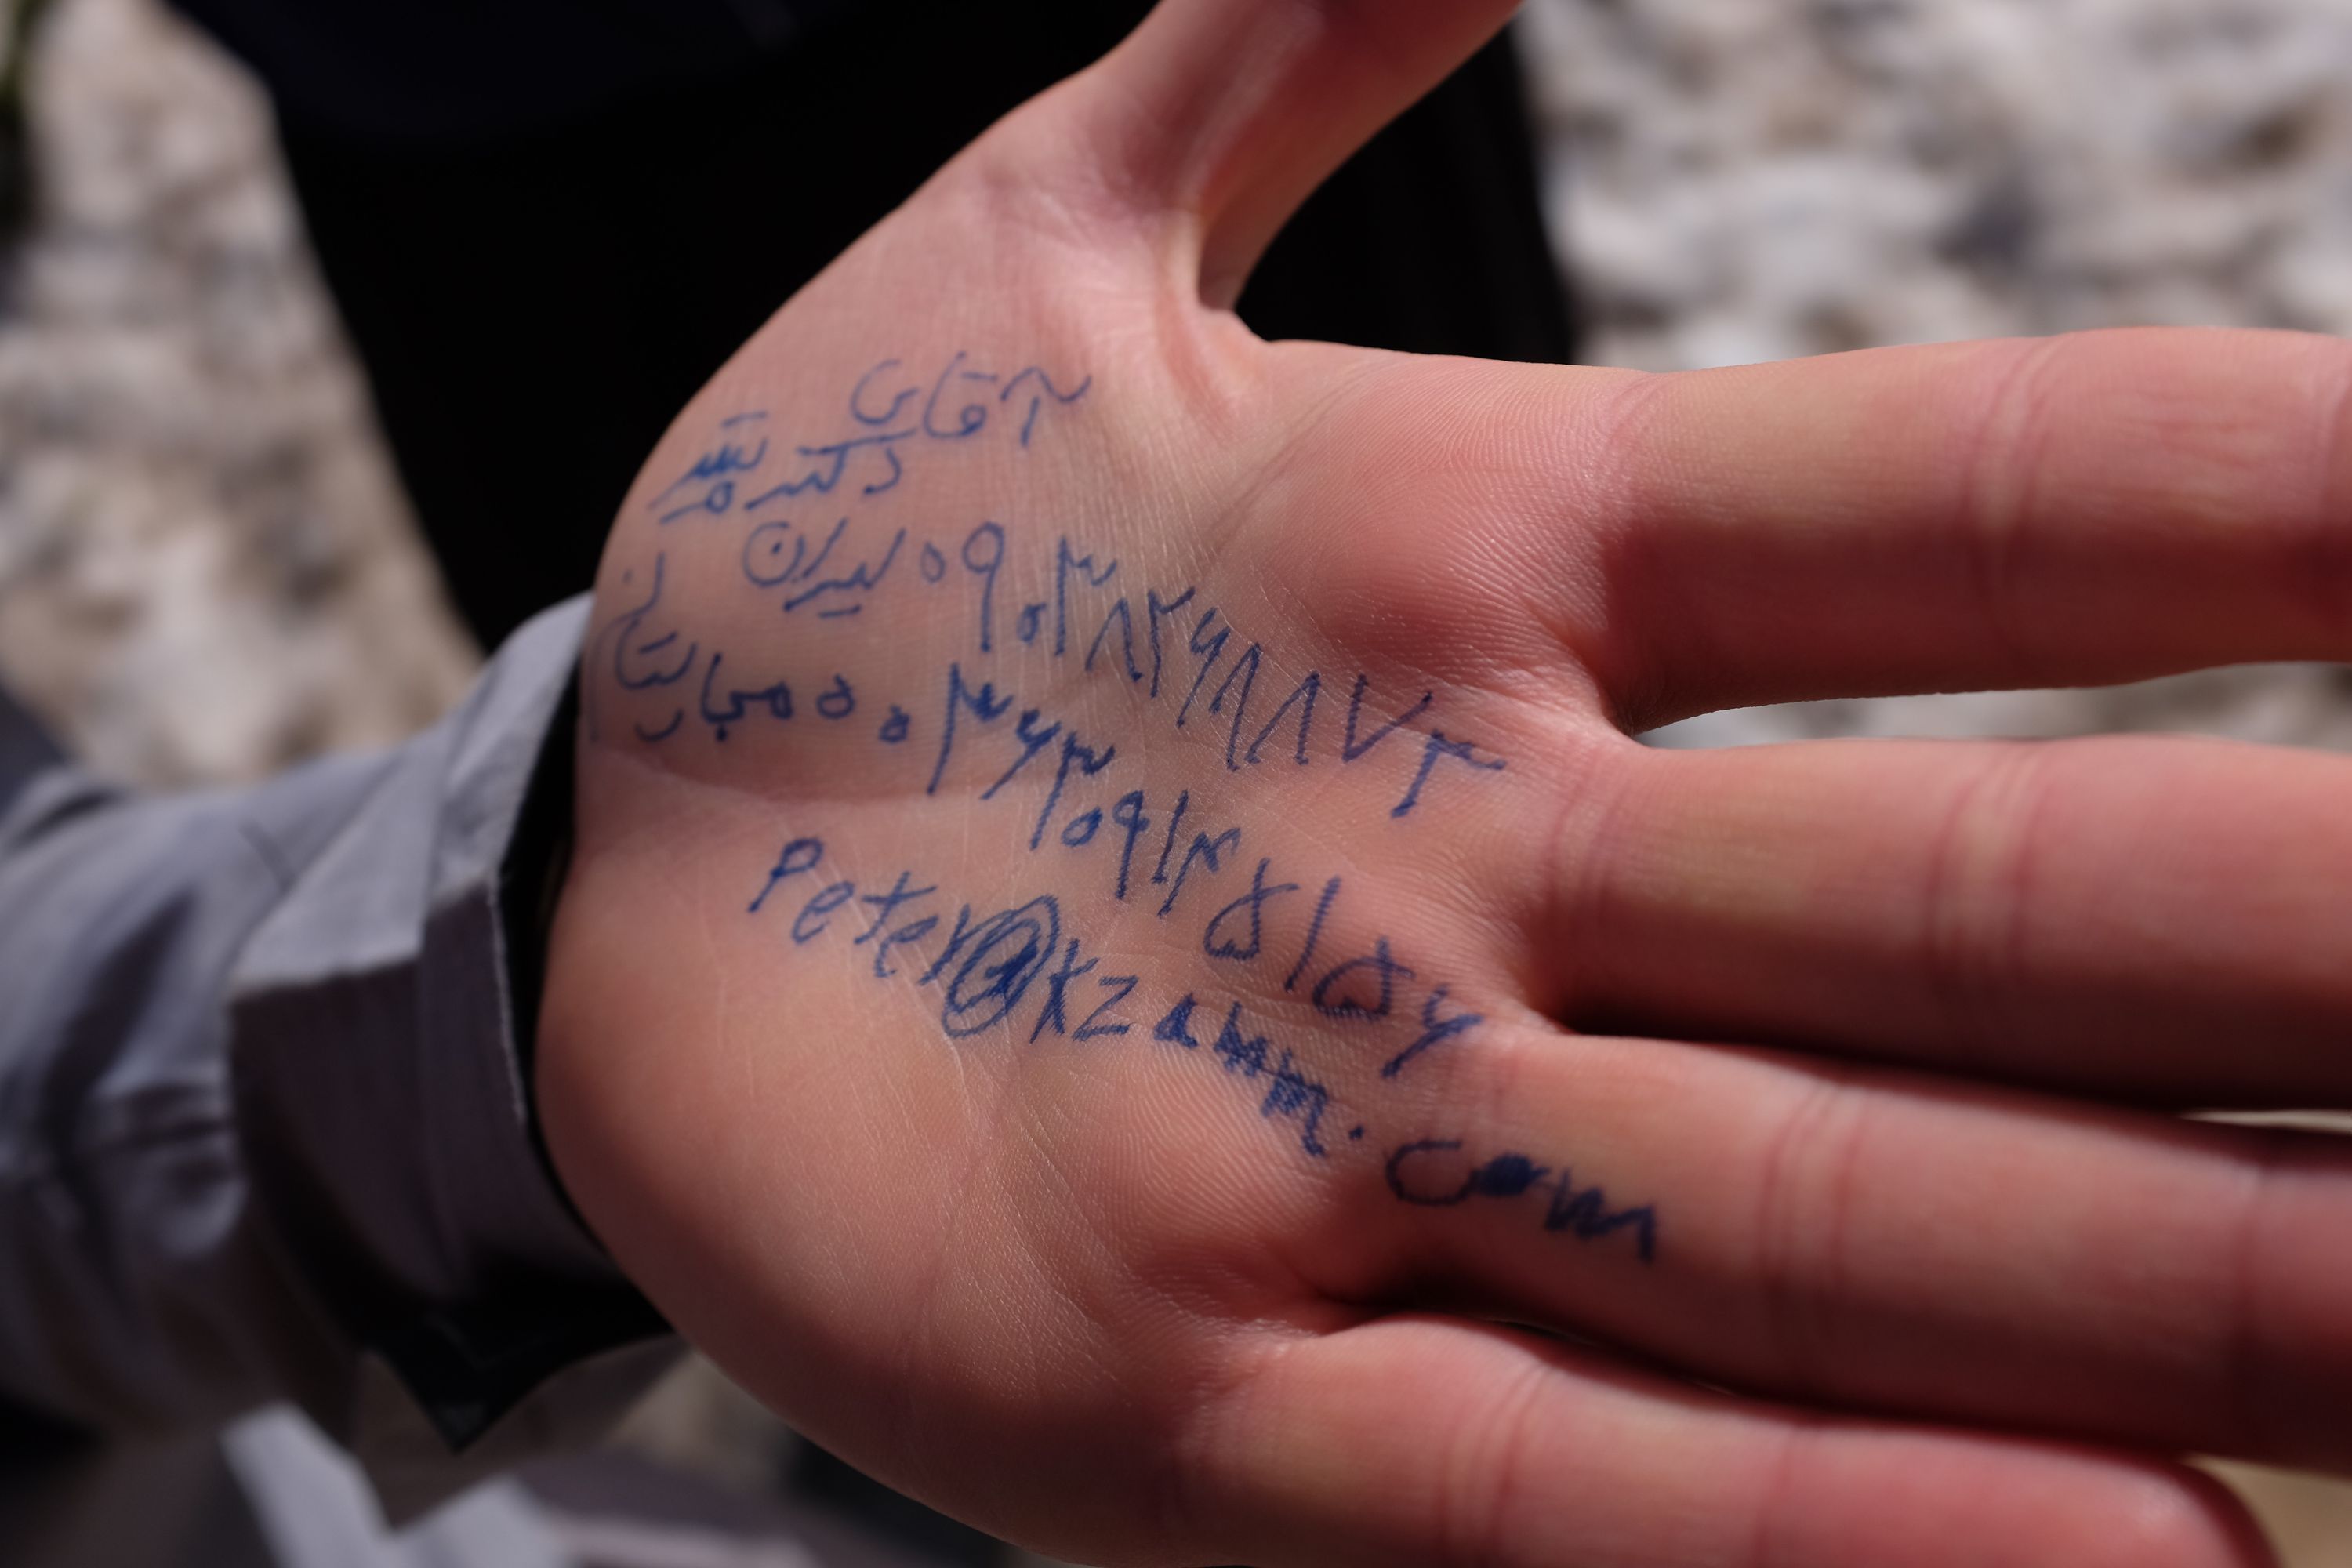 Closeup of a hand with Persian numbers and an email address, my previous one, scrawled on its palm in blue biro.